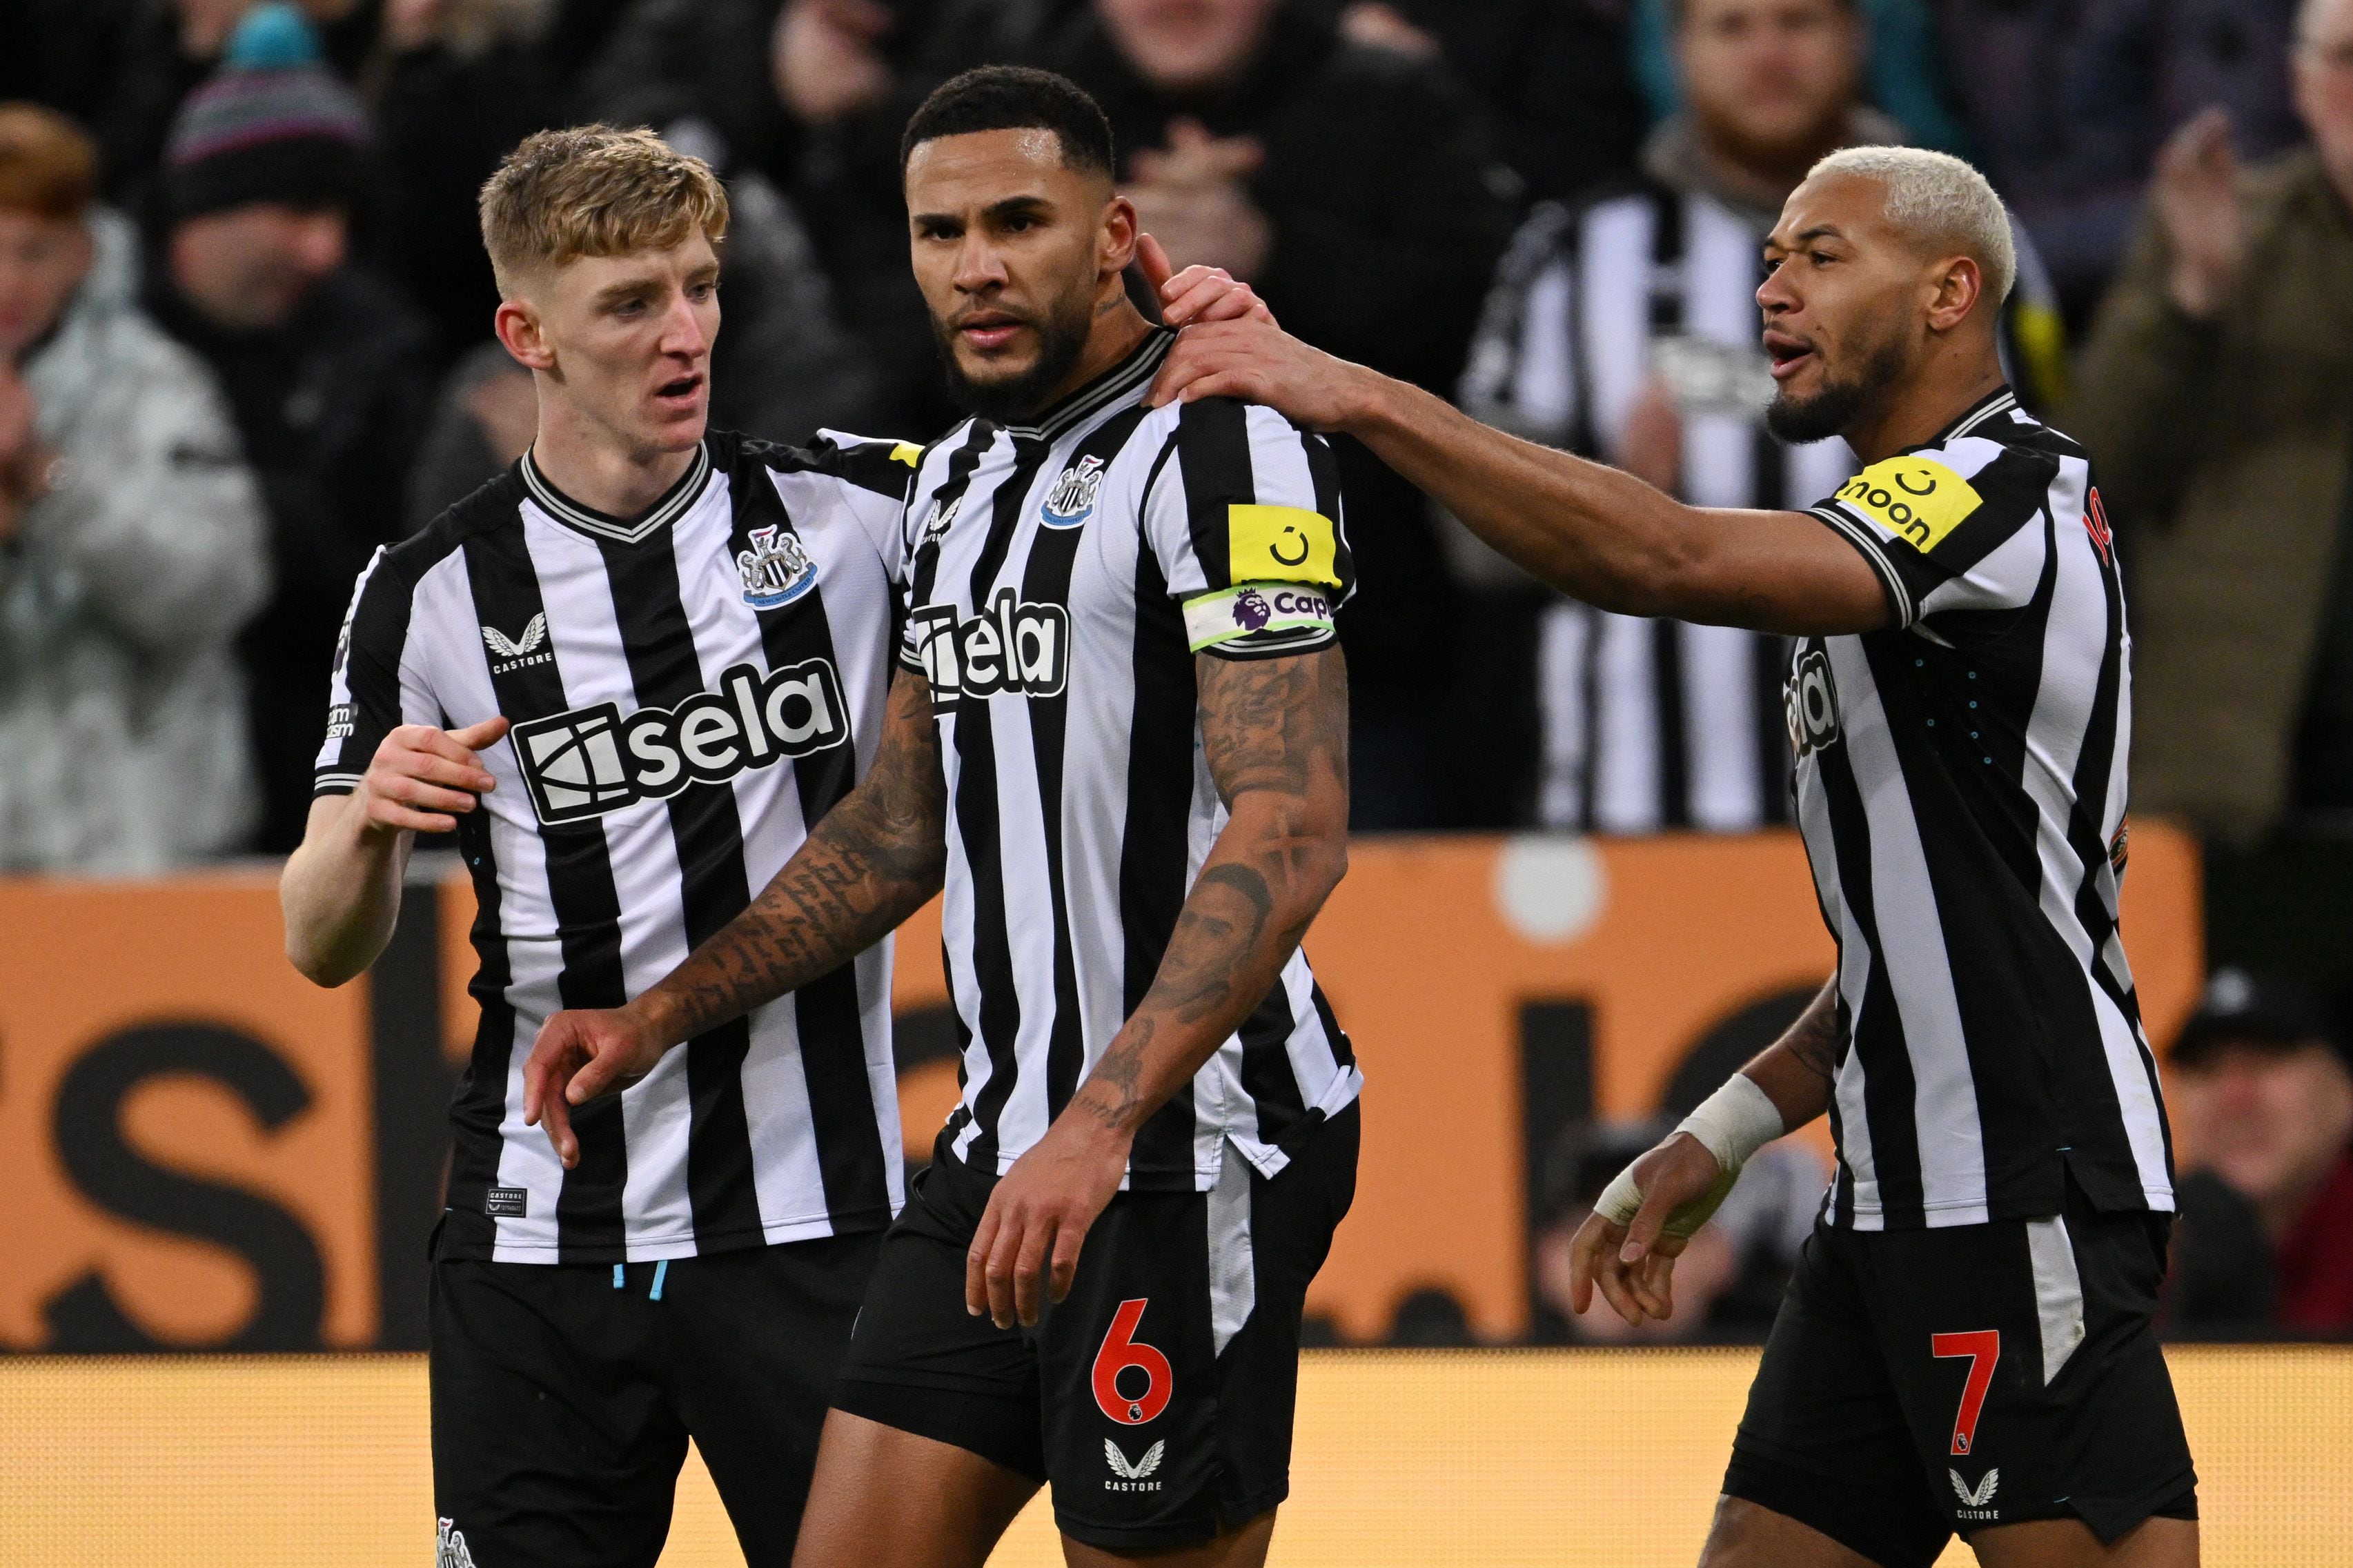 newcastle trio star in dominant win over chelsea: premier league team of the week